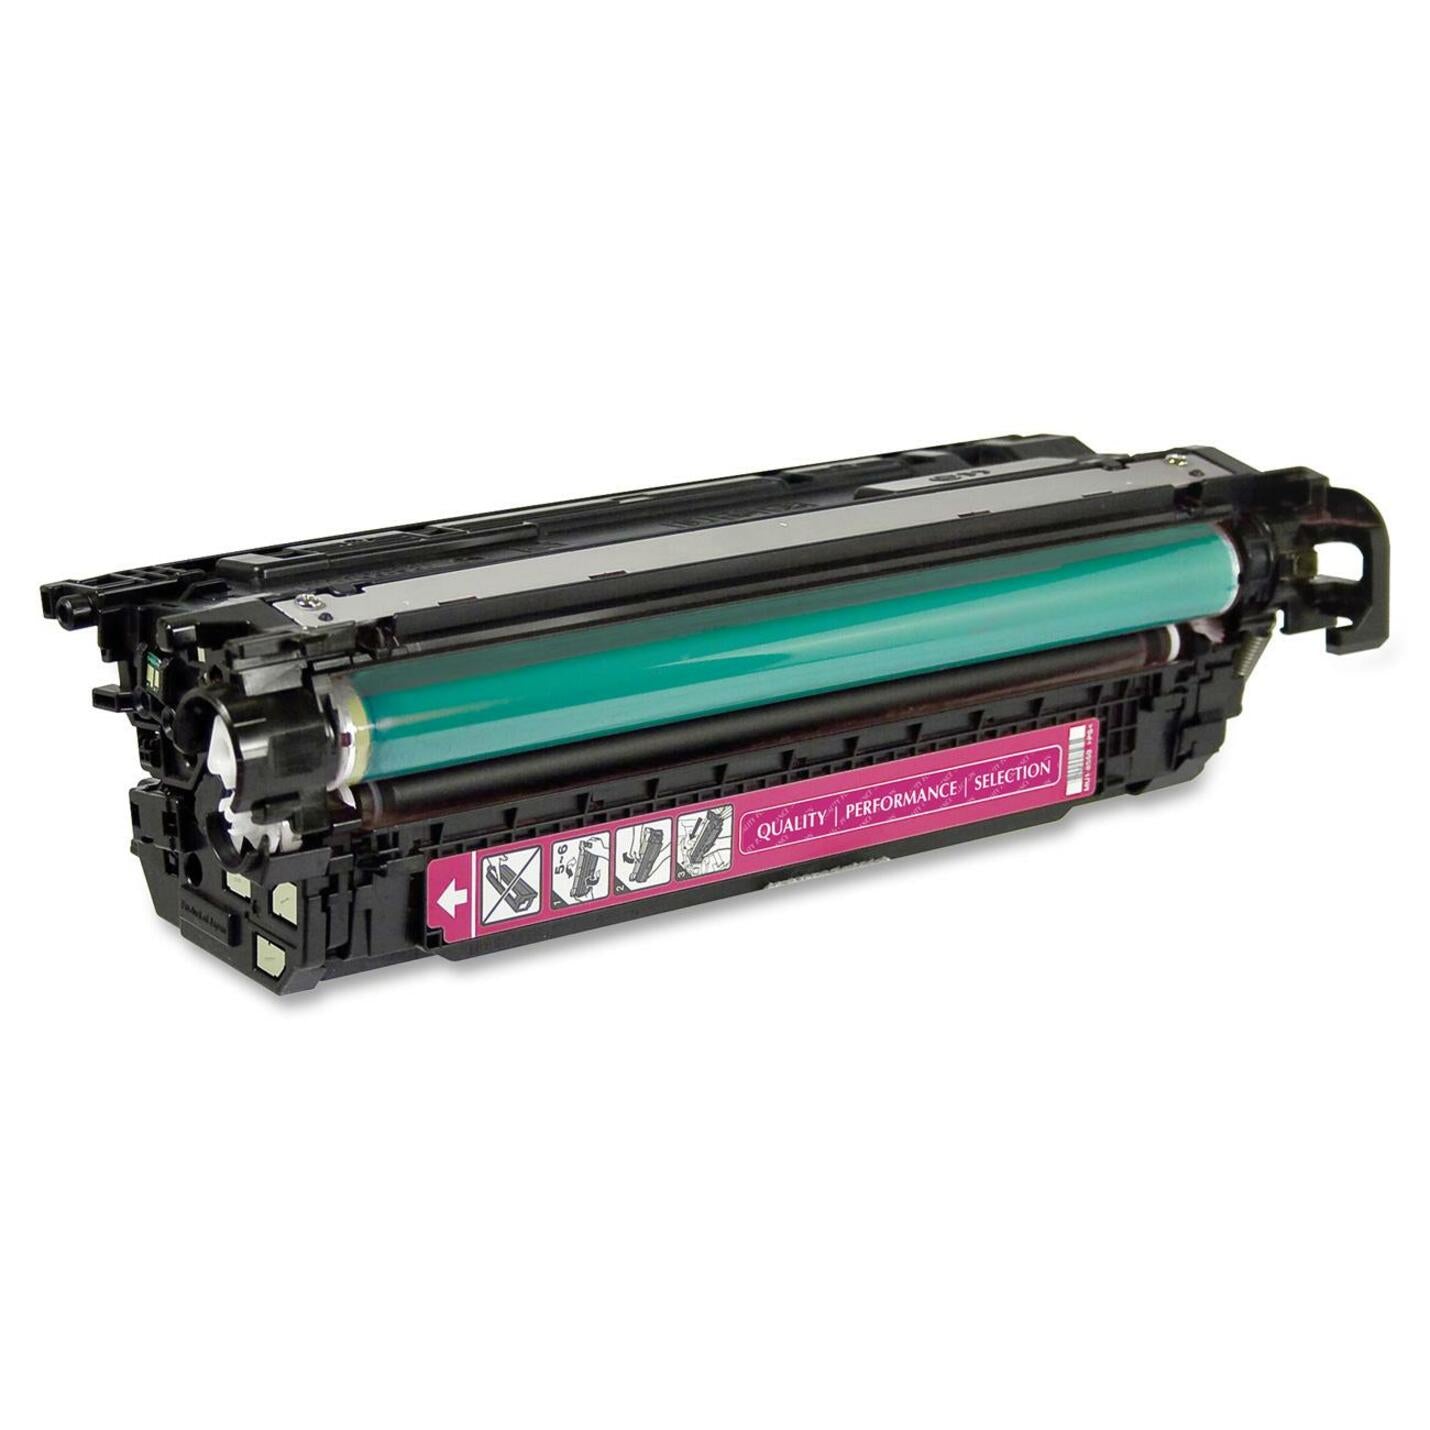 West Point 200243P Remanufactured Toner Cartridge Alternative For HP 648A (CE263A), Magenta, 11,000 Page Yield